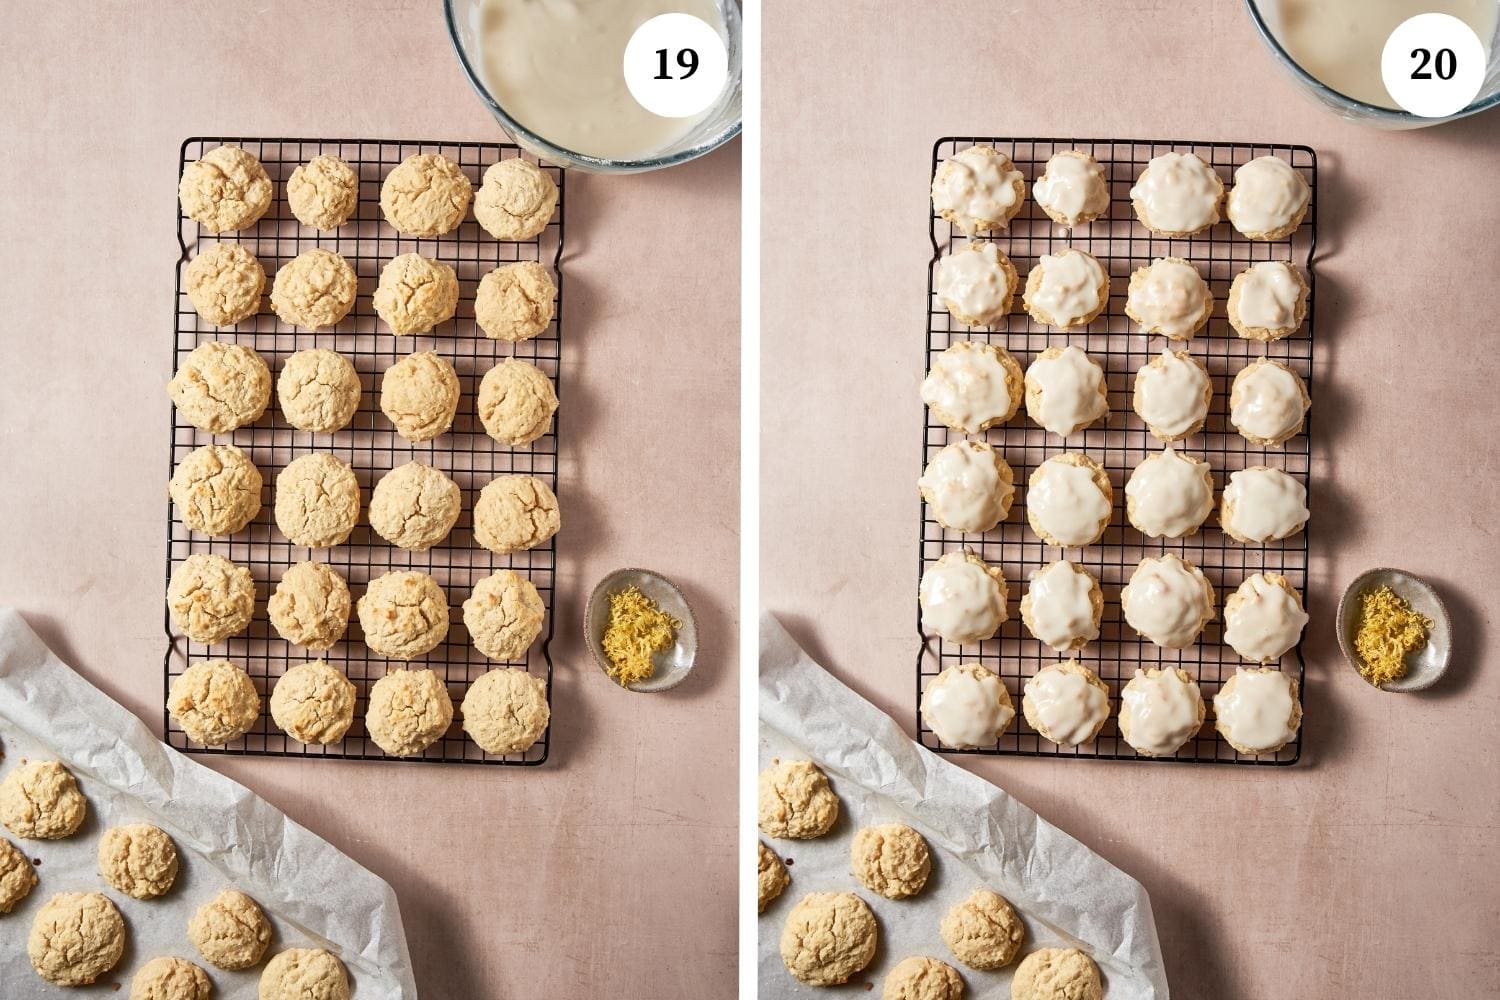 Ricotta cookies procedure: the baked cookes are frosted.